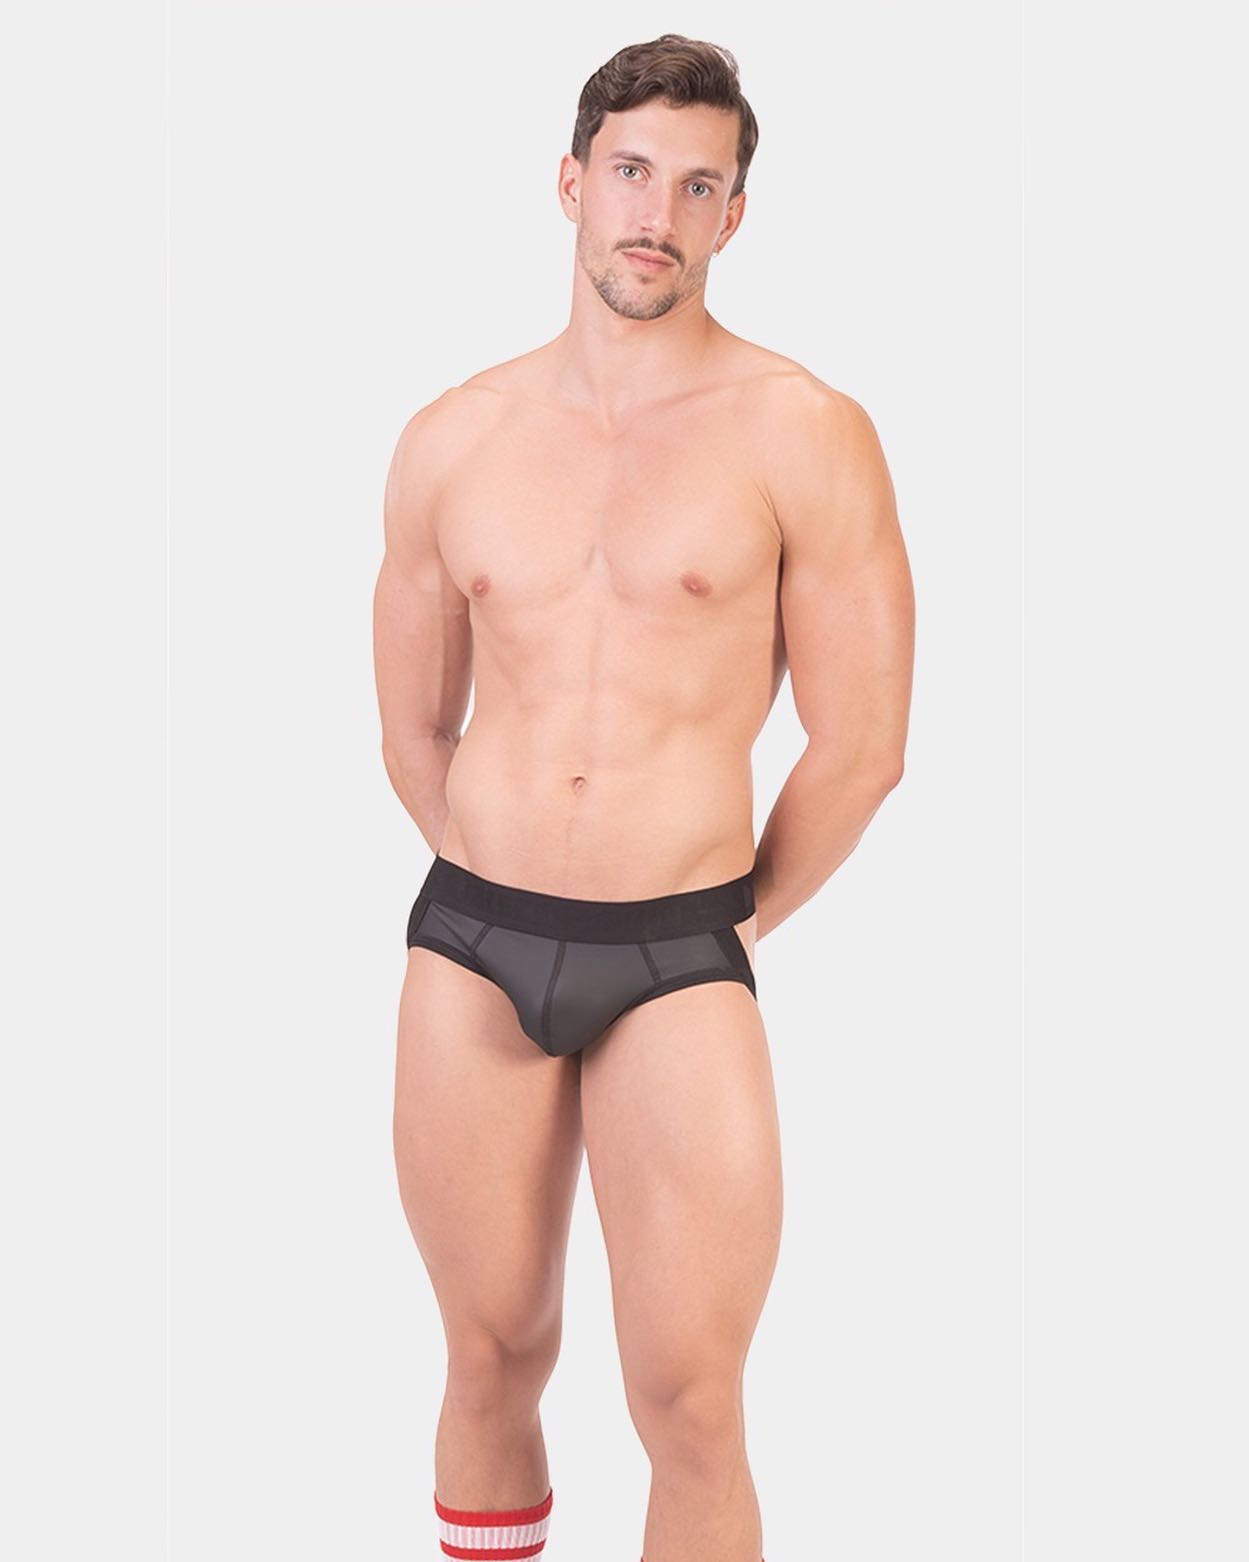 The Barcode Berlin Jock Miko is a fetish-inspired jock brief in black. An innovative pair of underwear with a black fabric made from a unique mix of polyester, polyurethane and elastane. Check it out:
_____
menandunderwear.com/shop